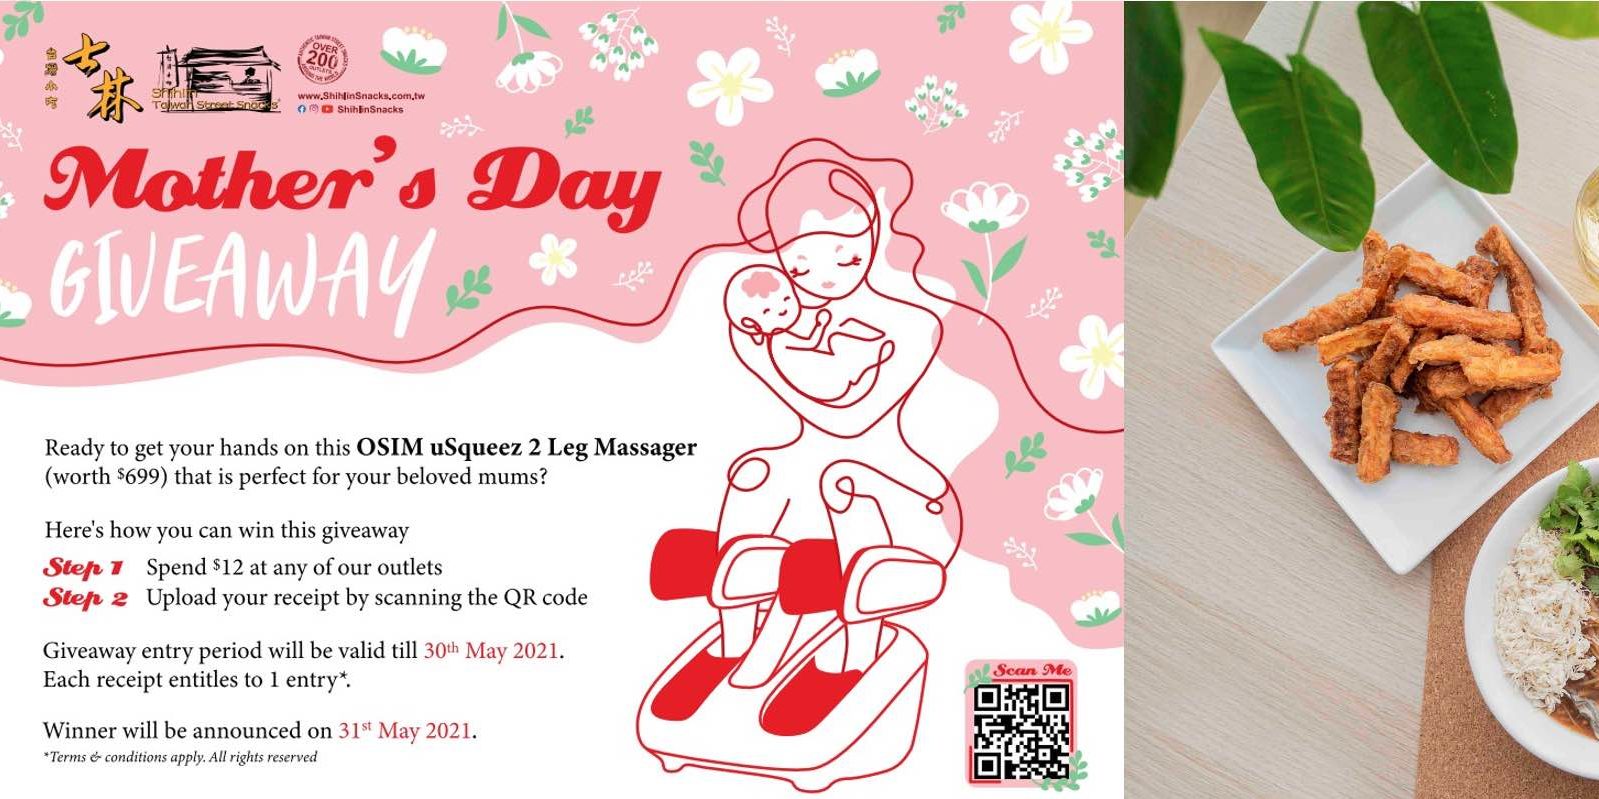 This Mother’s Day, let Shihlin Taiwan Street Snacks pamper your mom with an ultimate giveaway!